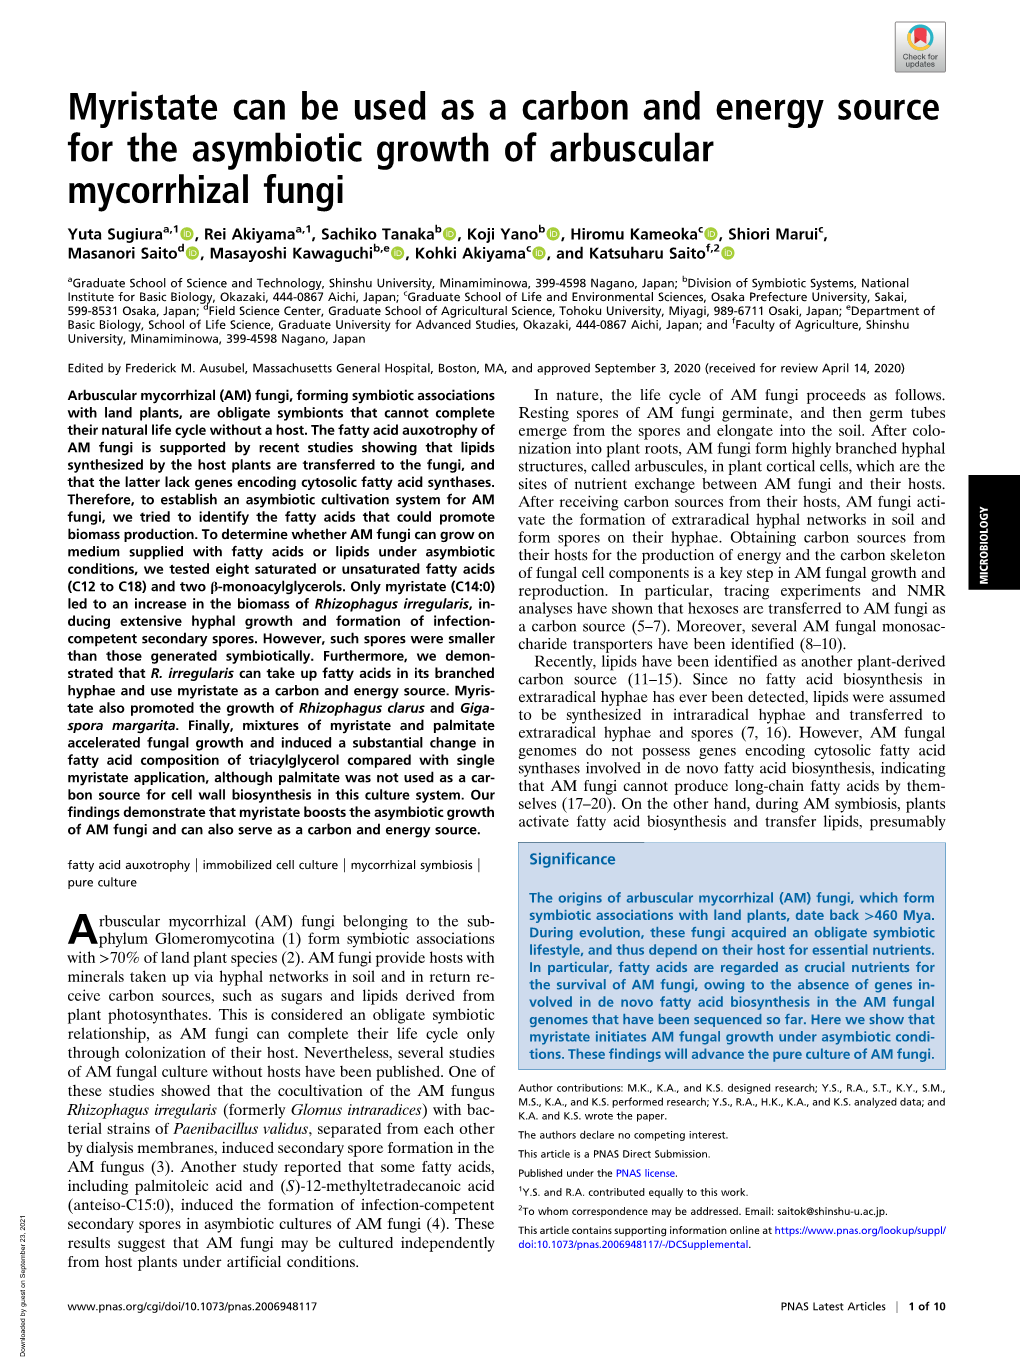 Myristate Can Be Used As a Carbon and Energy Source for the Asymbiotic Growth of Arbuscular Mycorrhizal Fungi